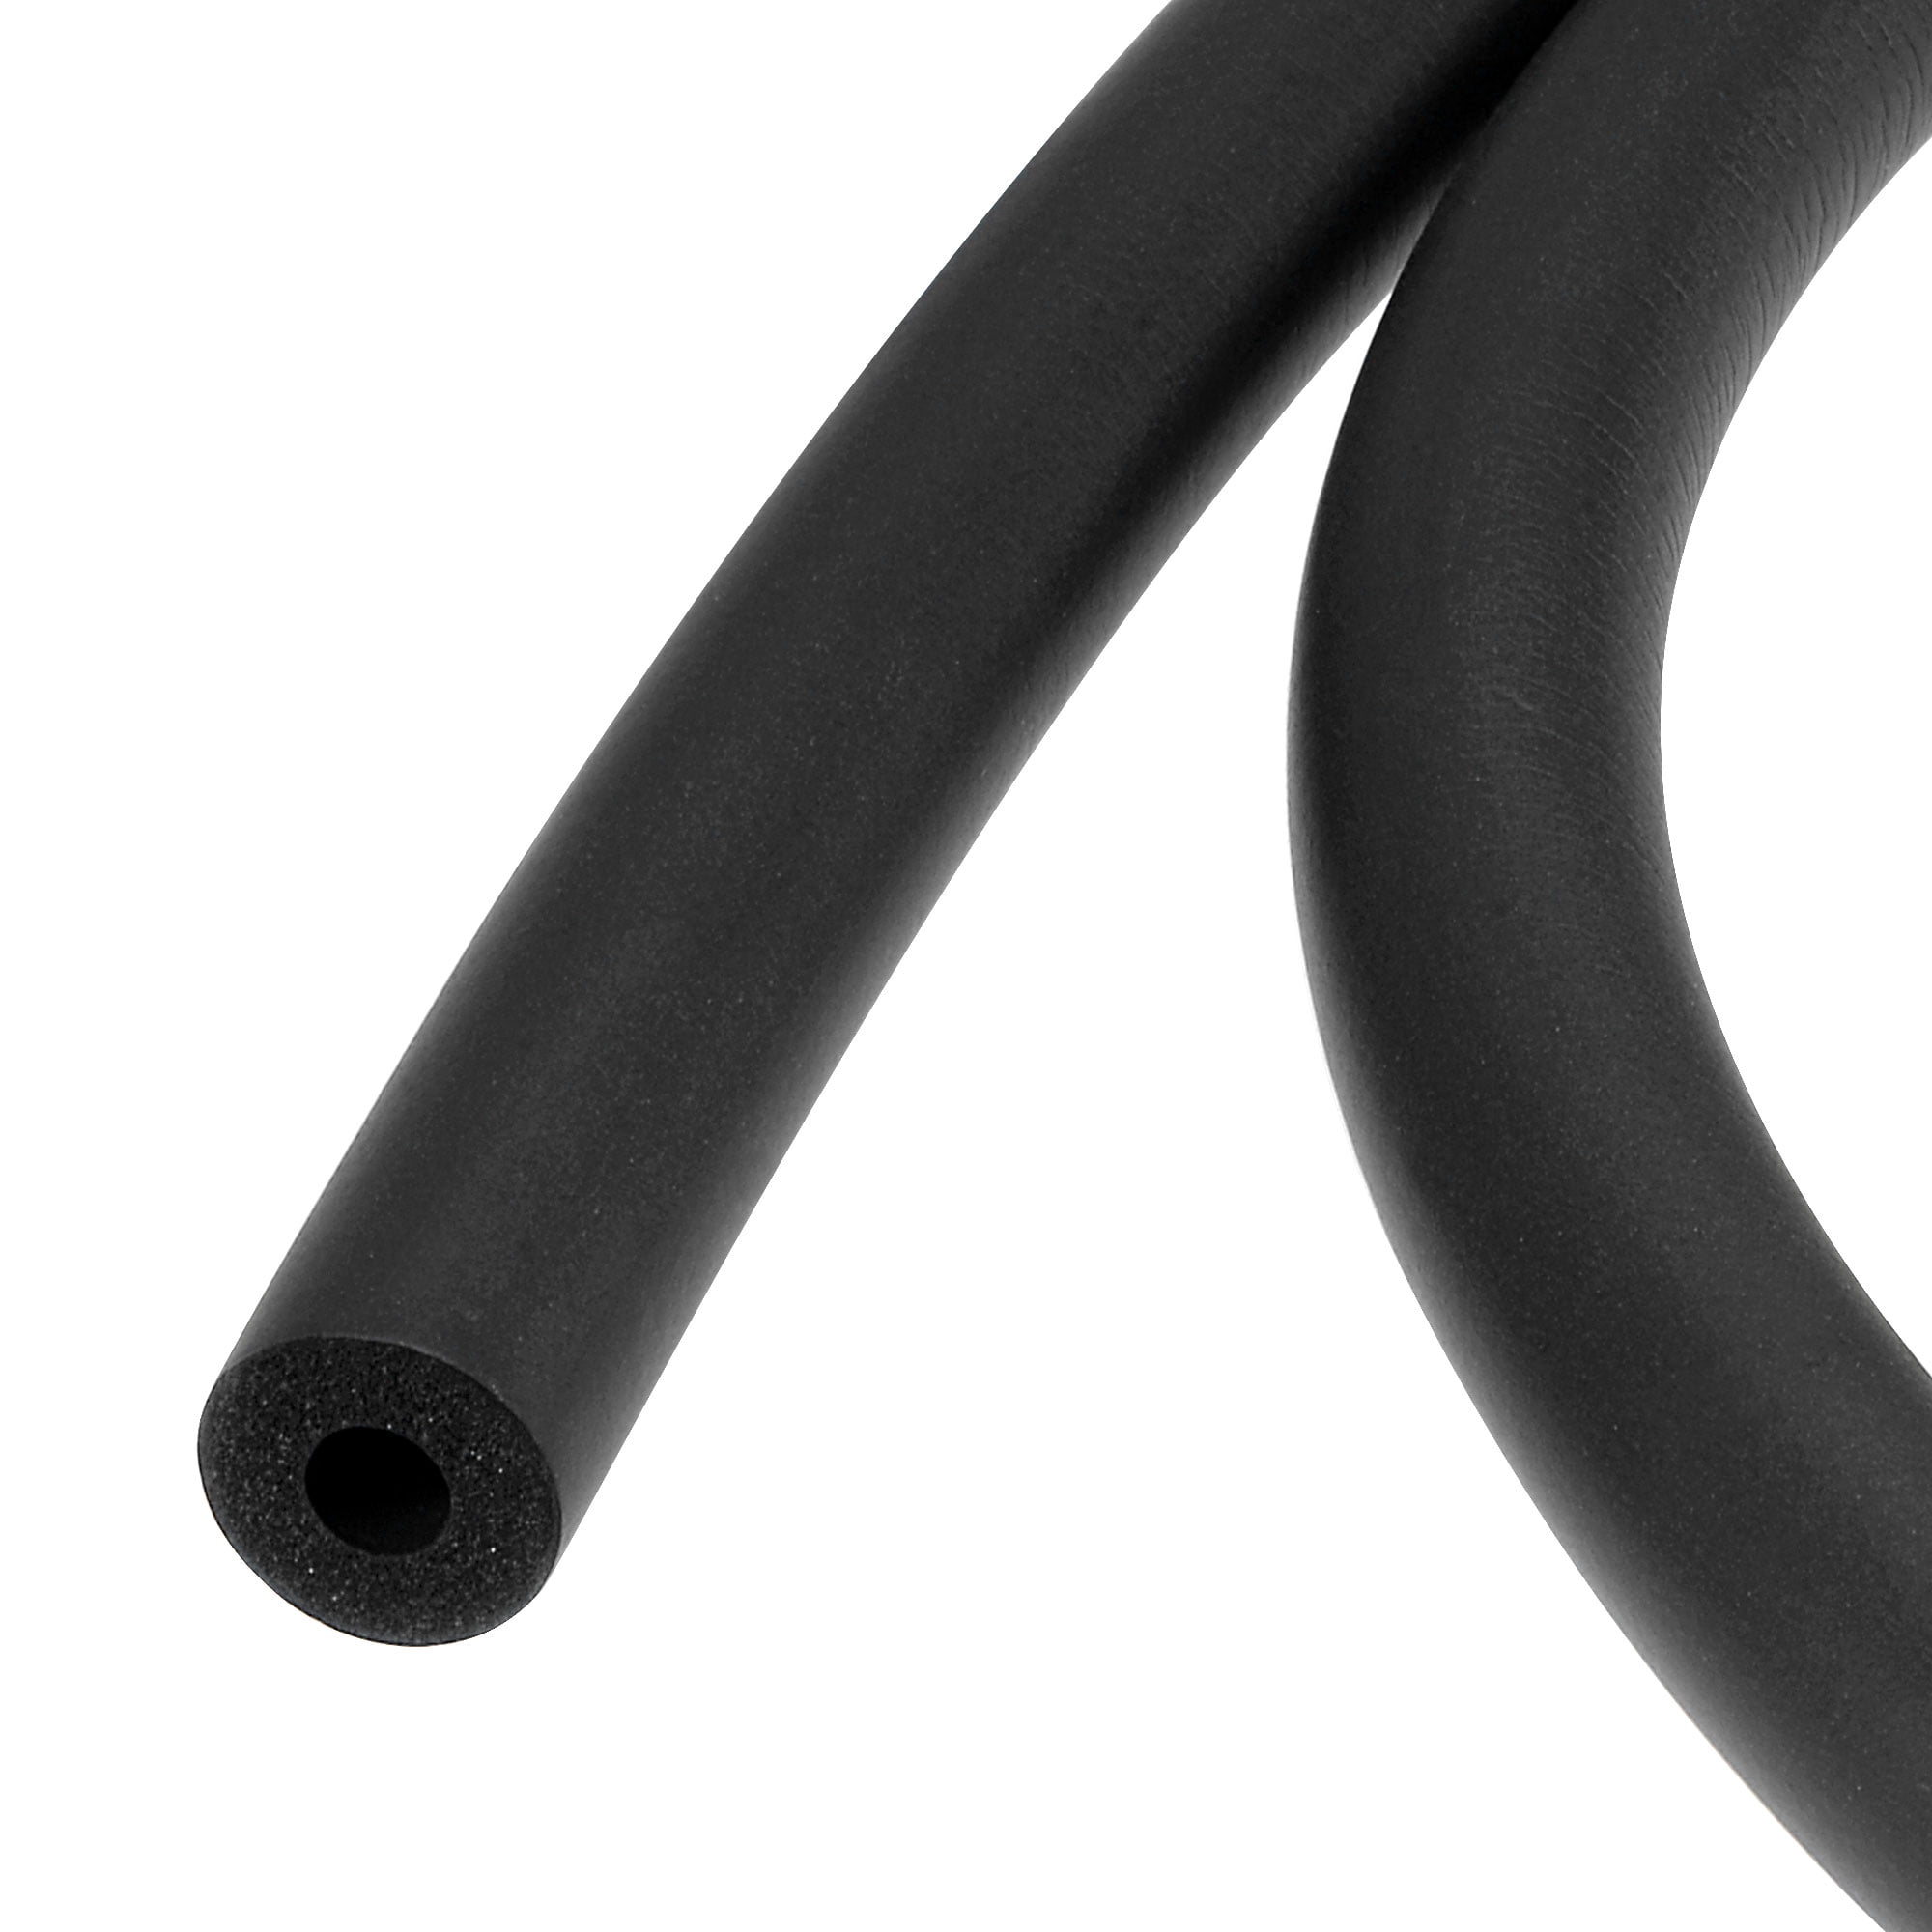 AC BLACK FOAM TUBE AIRCON PIPE FIRE RATED INSULATION 2M 1 1/8" I.D X 1/2" WALL 